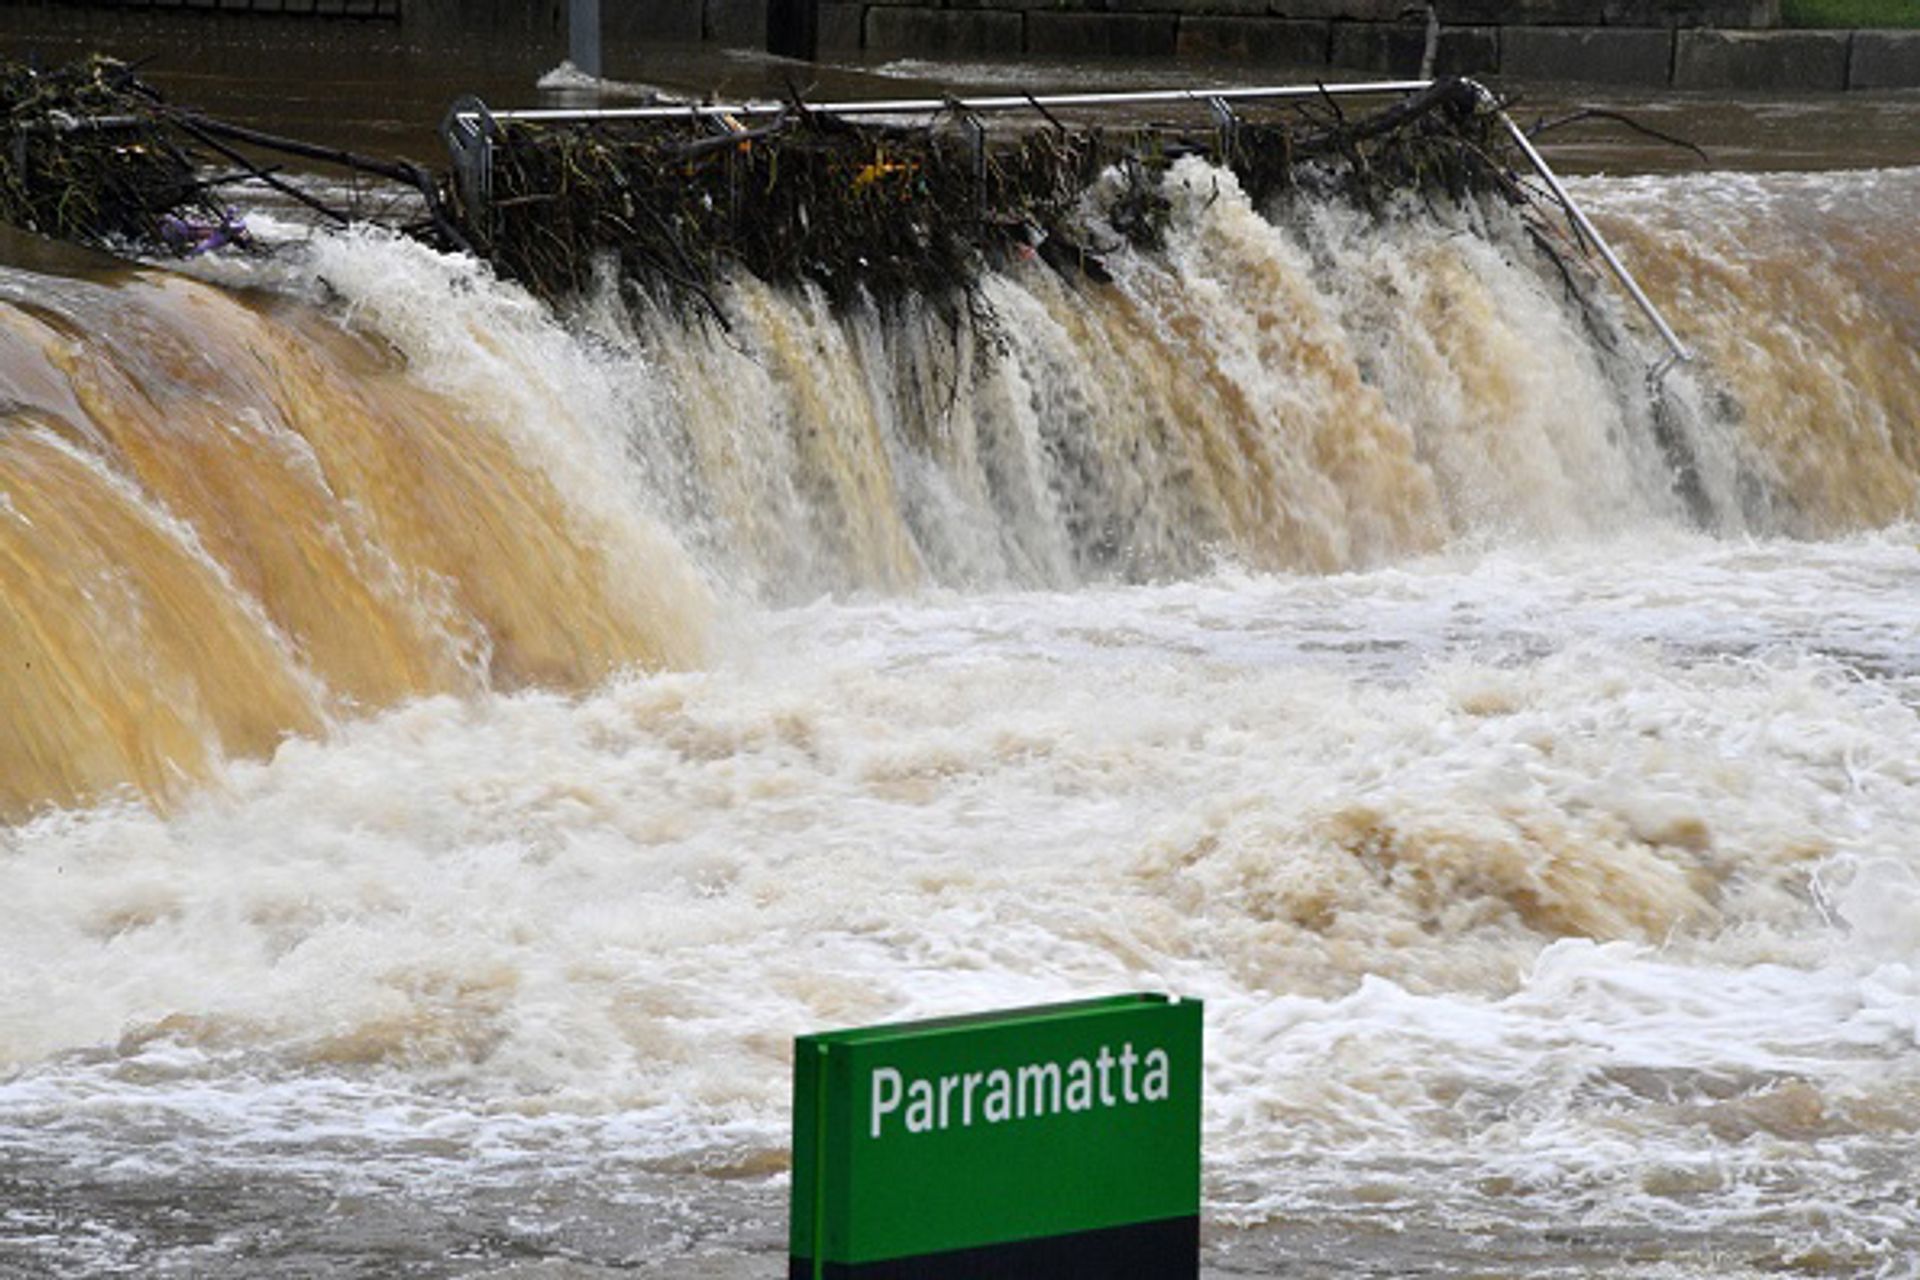 The Parramatta river flooded on 22 March as Sydney braced for its worst flooding in decades Photo: Saeed Khan/AFP via Getty Images